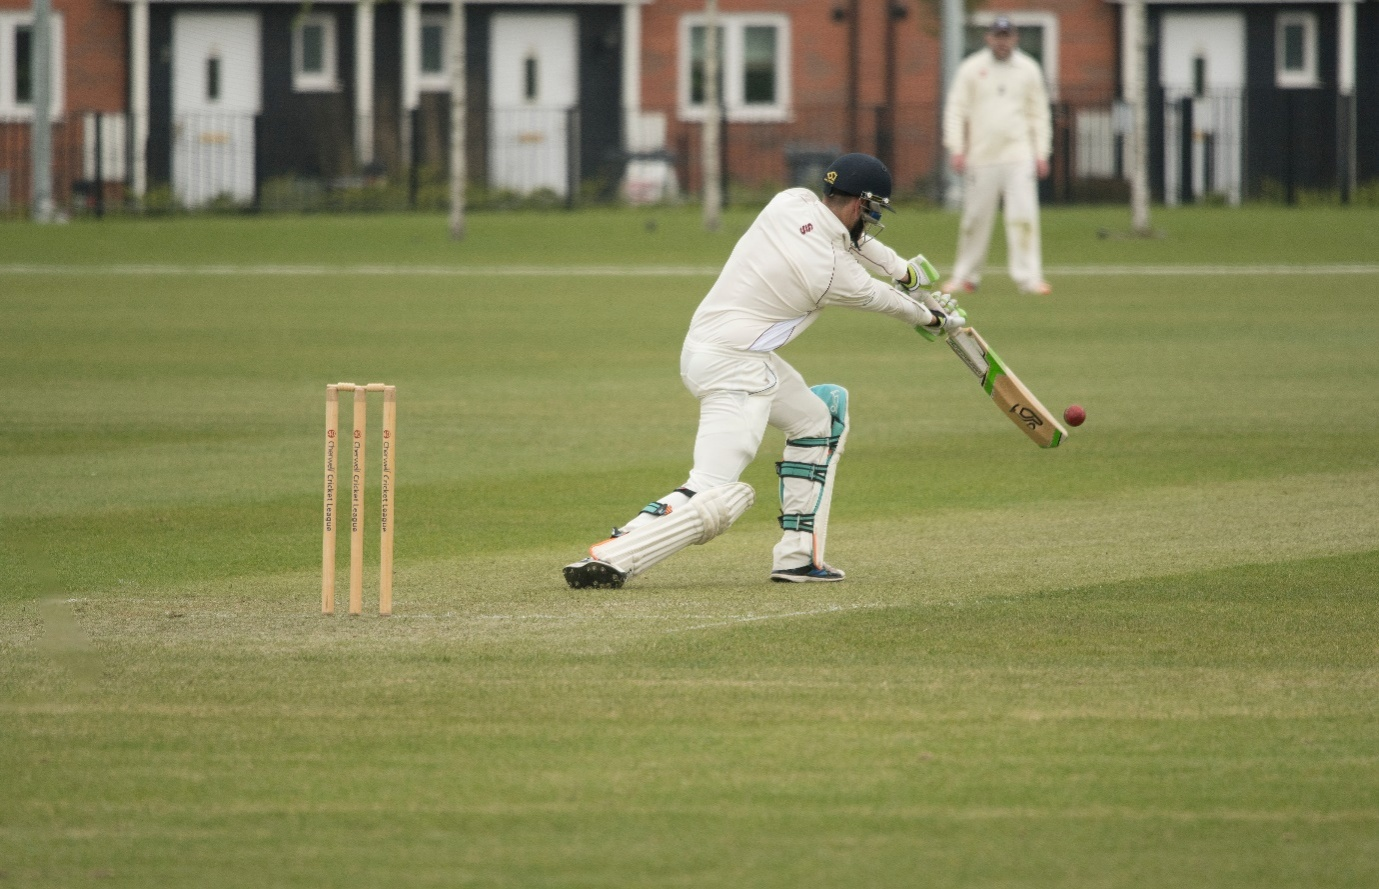 Player hitting a cover drive.